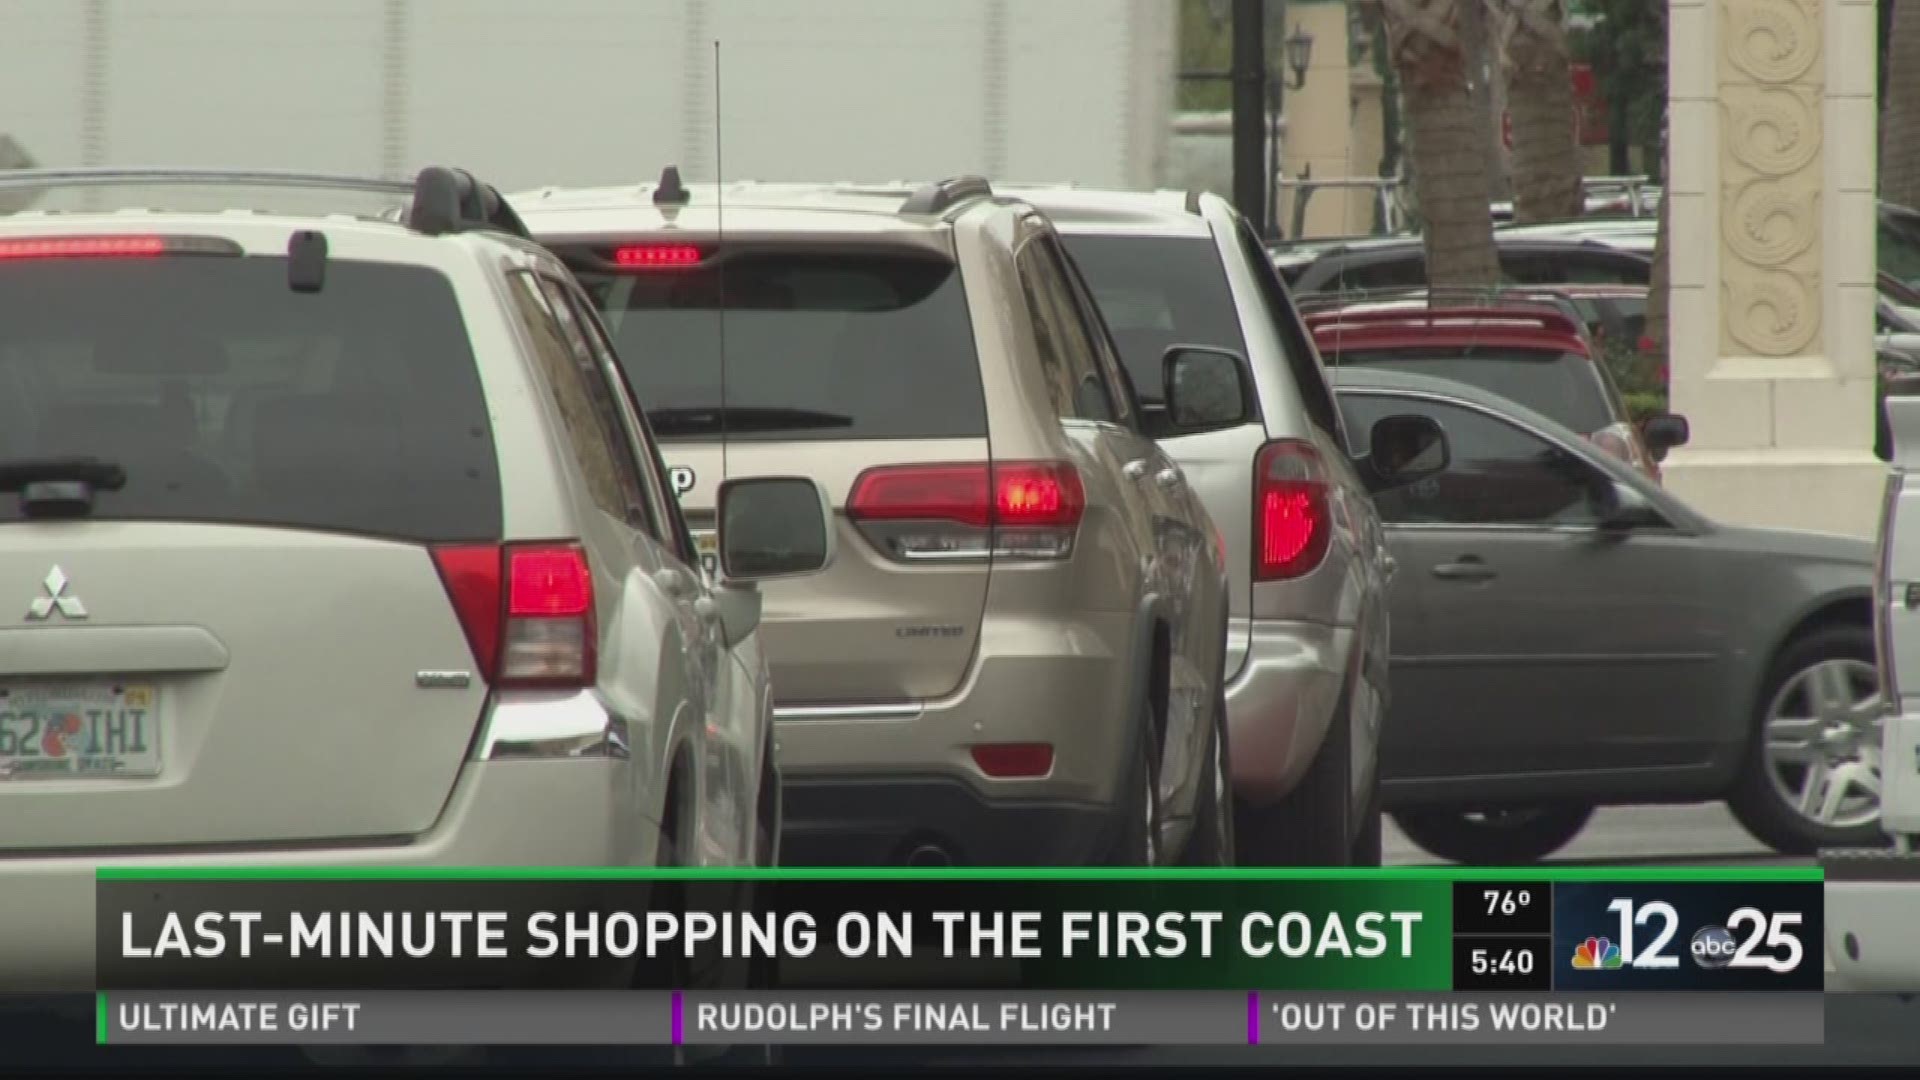 Last-minute shopping on the First Coast